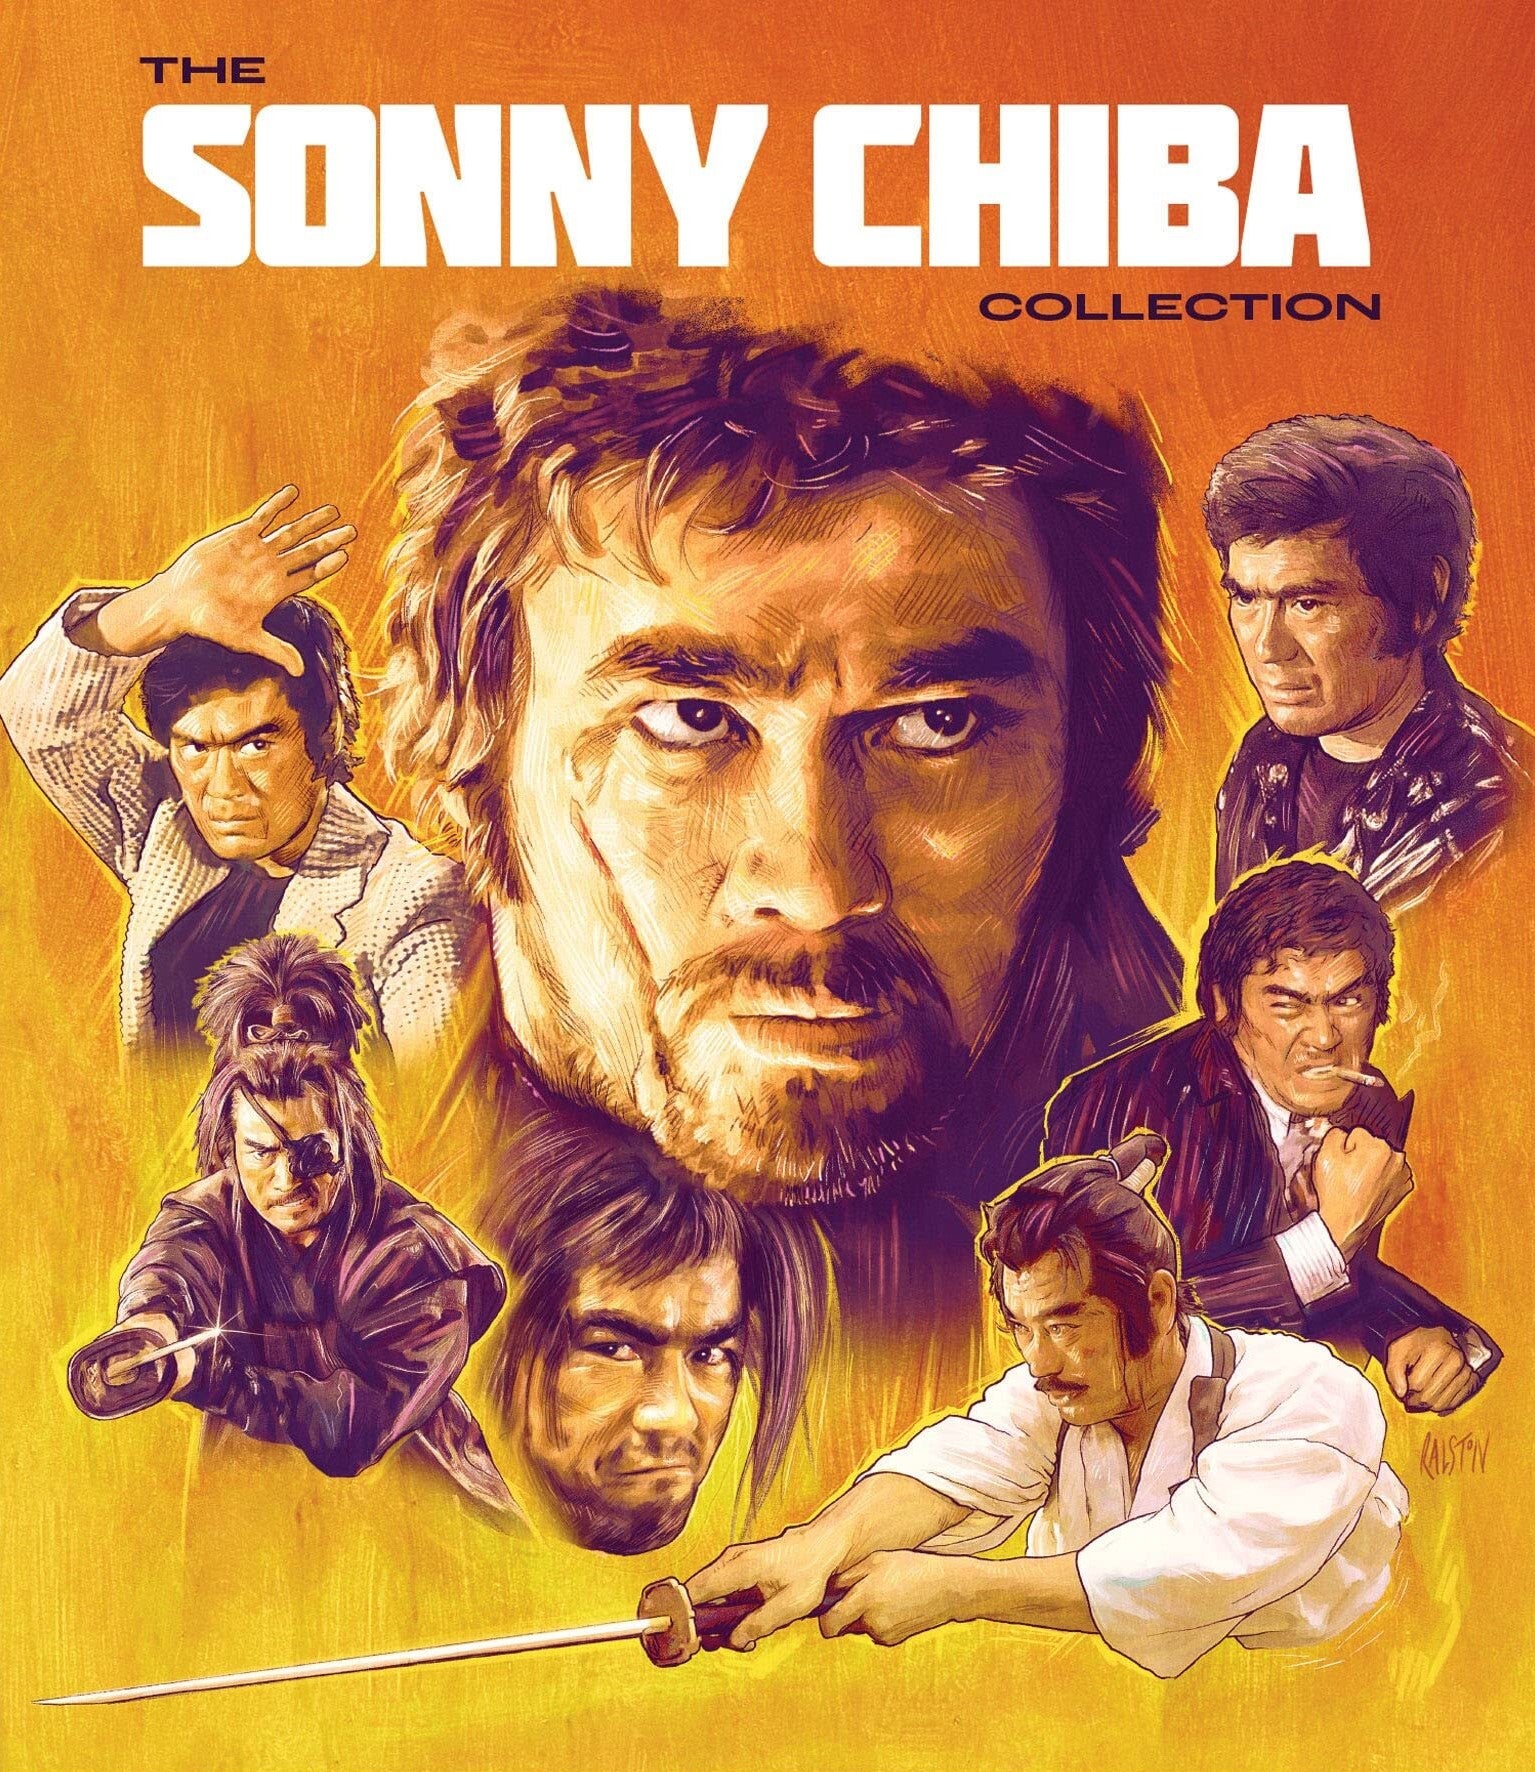 THE SONNY CHIBA COLLECTION BLU-RAY